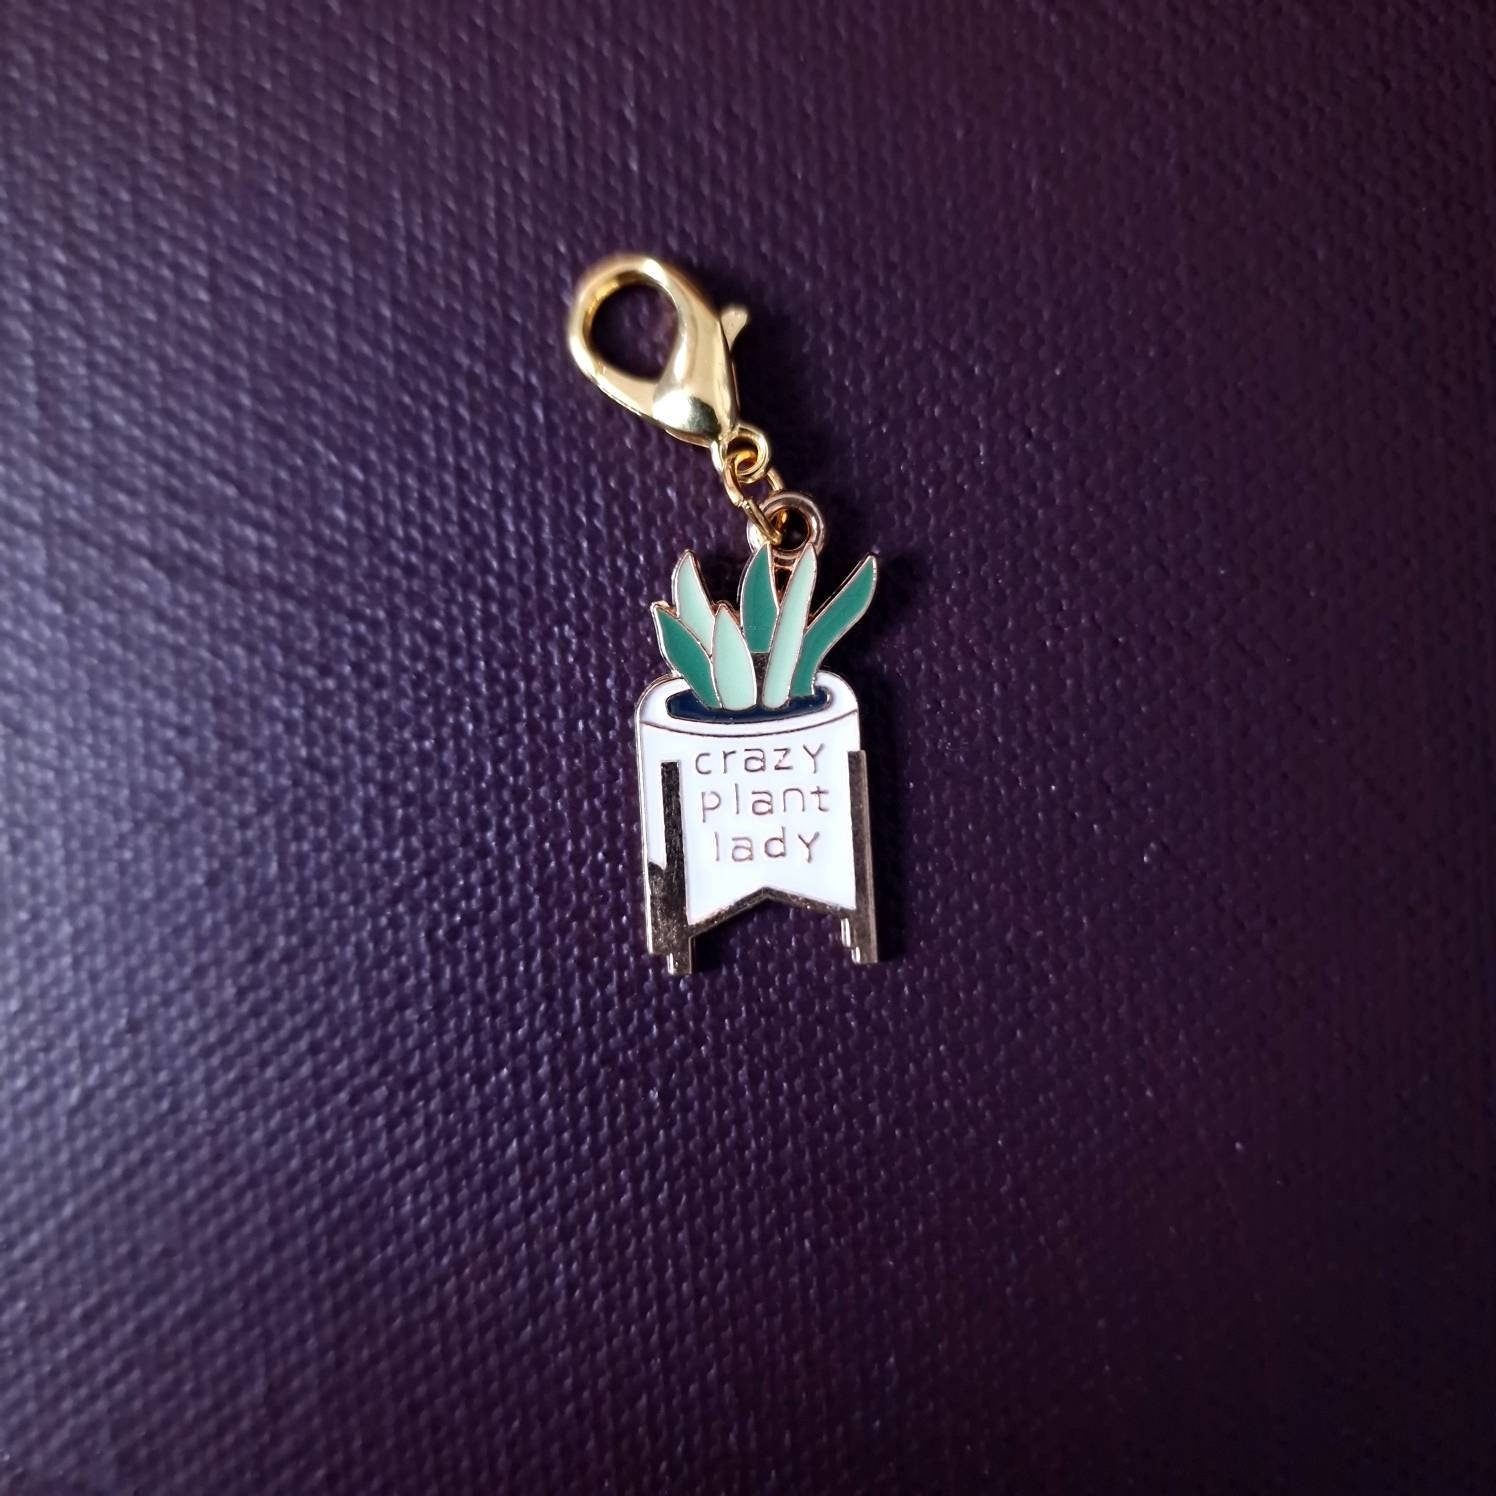 Stitch marker ~ Crazy plant lady~ Knitting notions, progress markers, progress keepers, knitting tools, gift for knitter